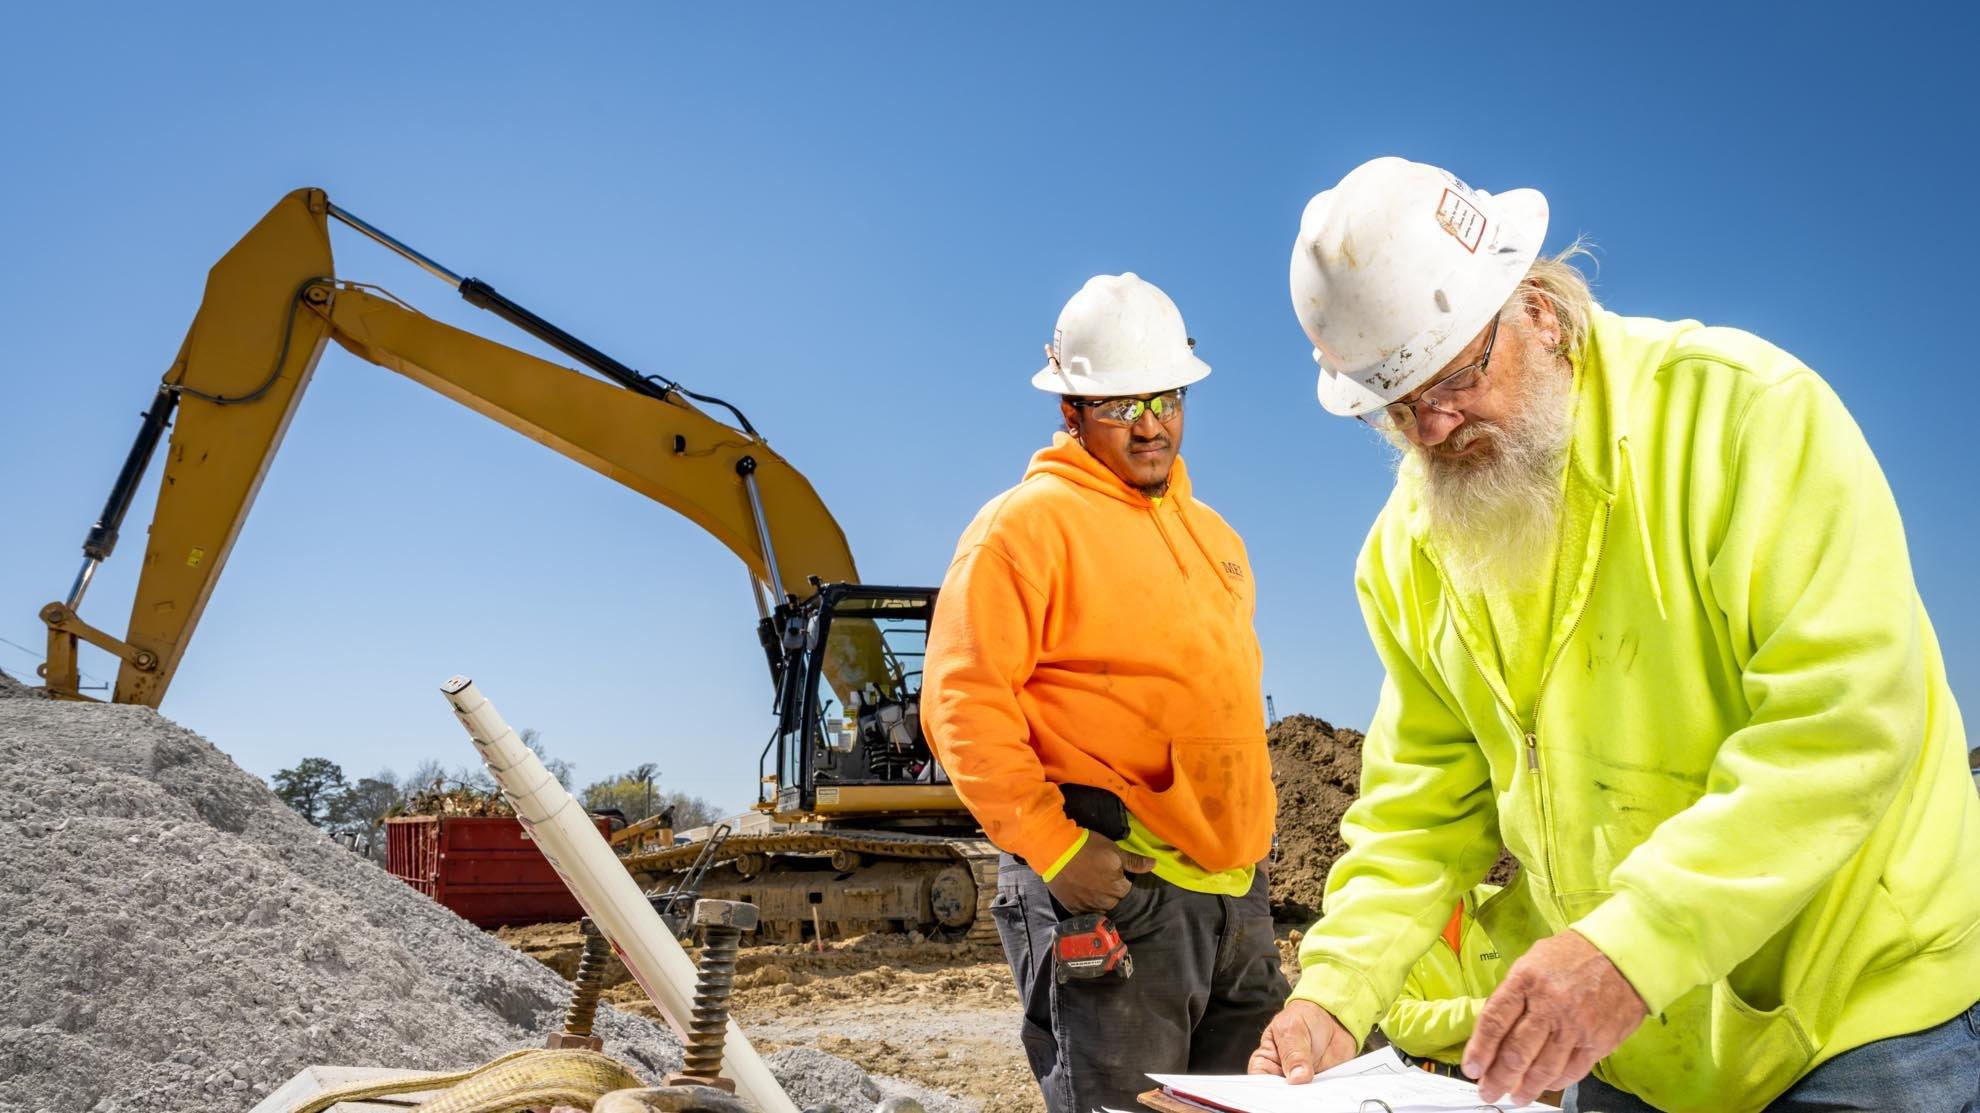 Two workers wearing hard hats on a construction jobsite review plans.